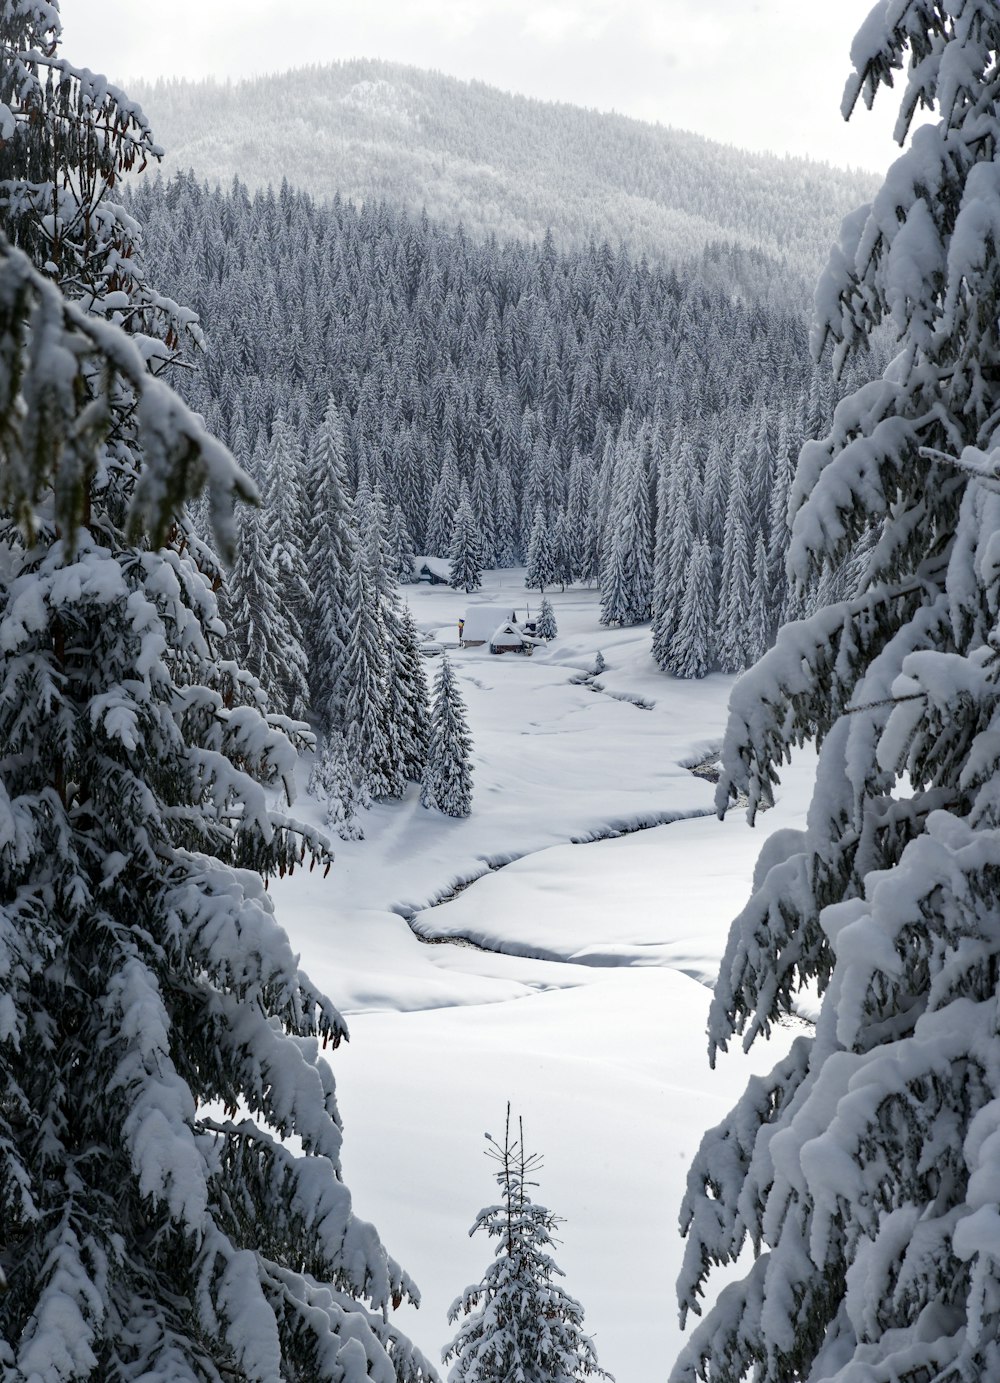 a view of a snow covered forest from a distance